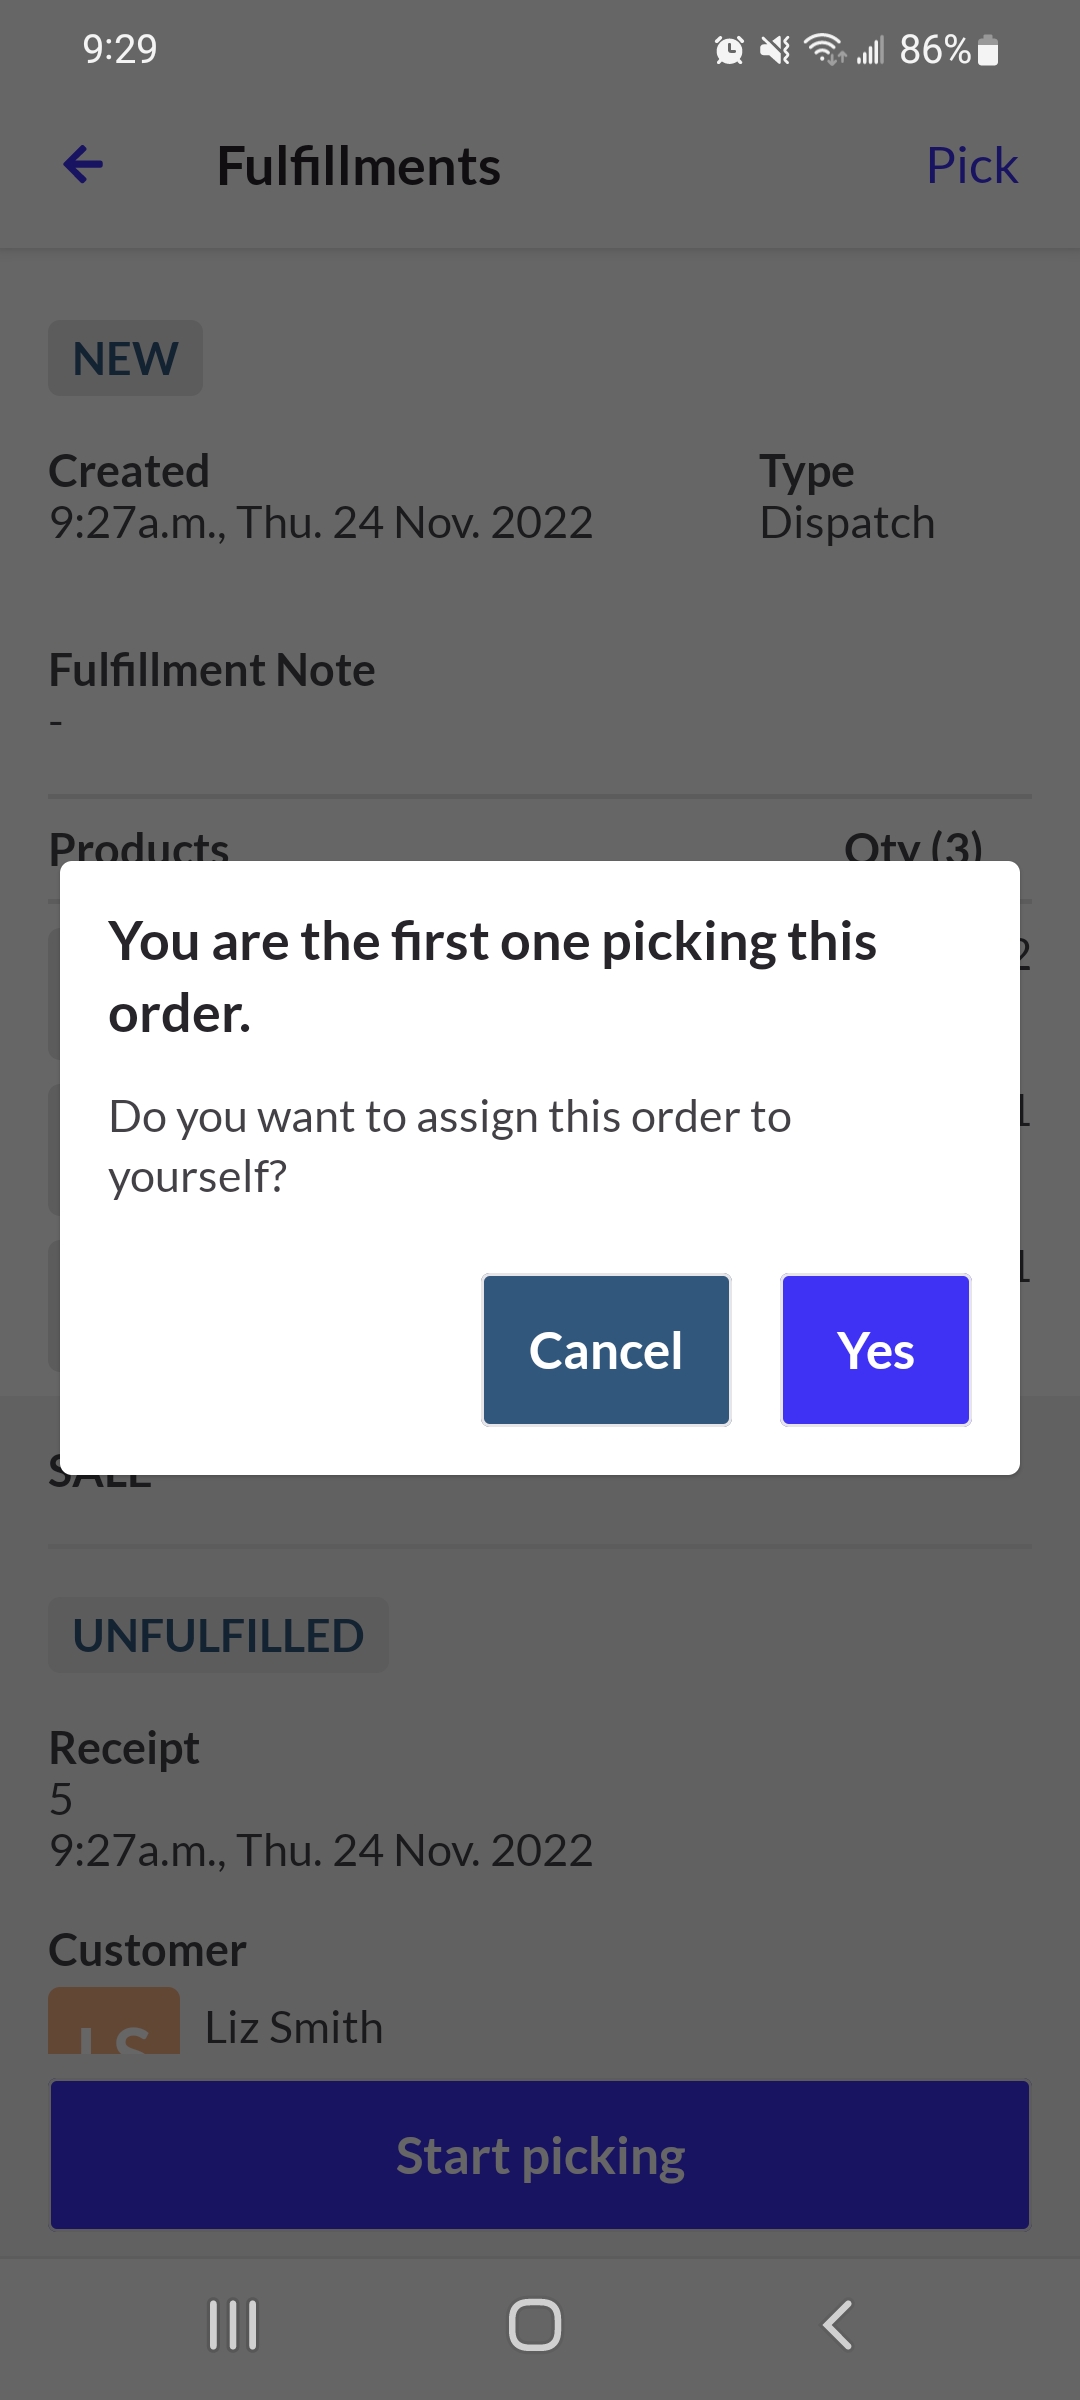 Pop up box to assign the fulfillment. Options to select yes or cancel.